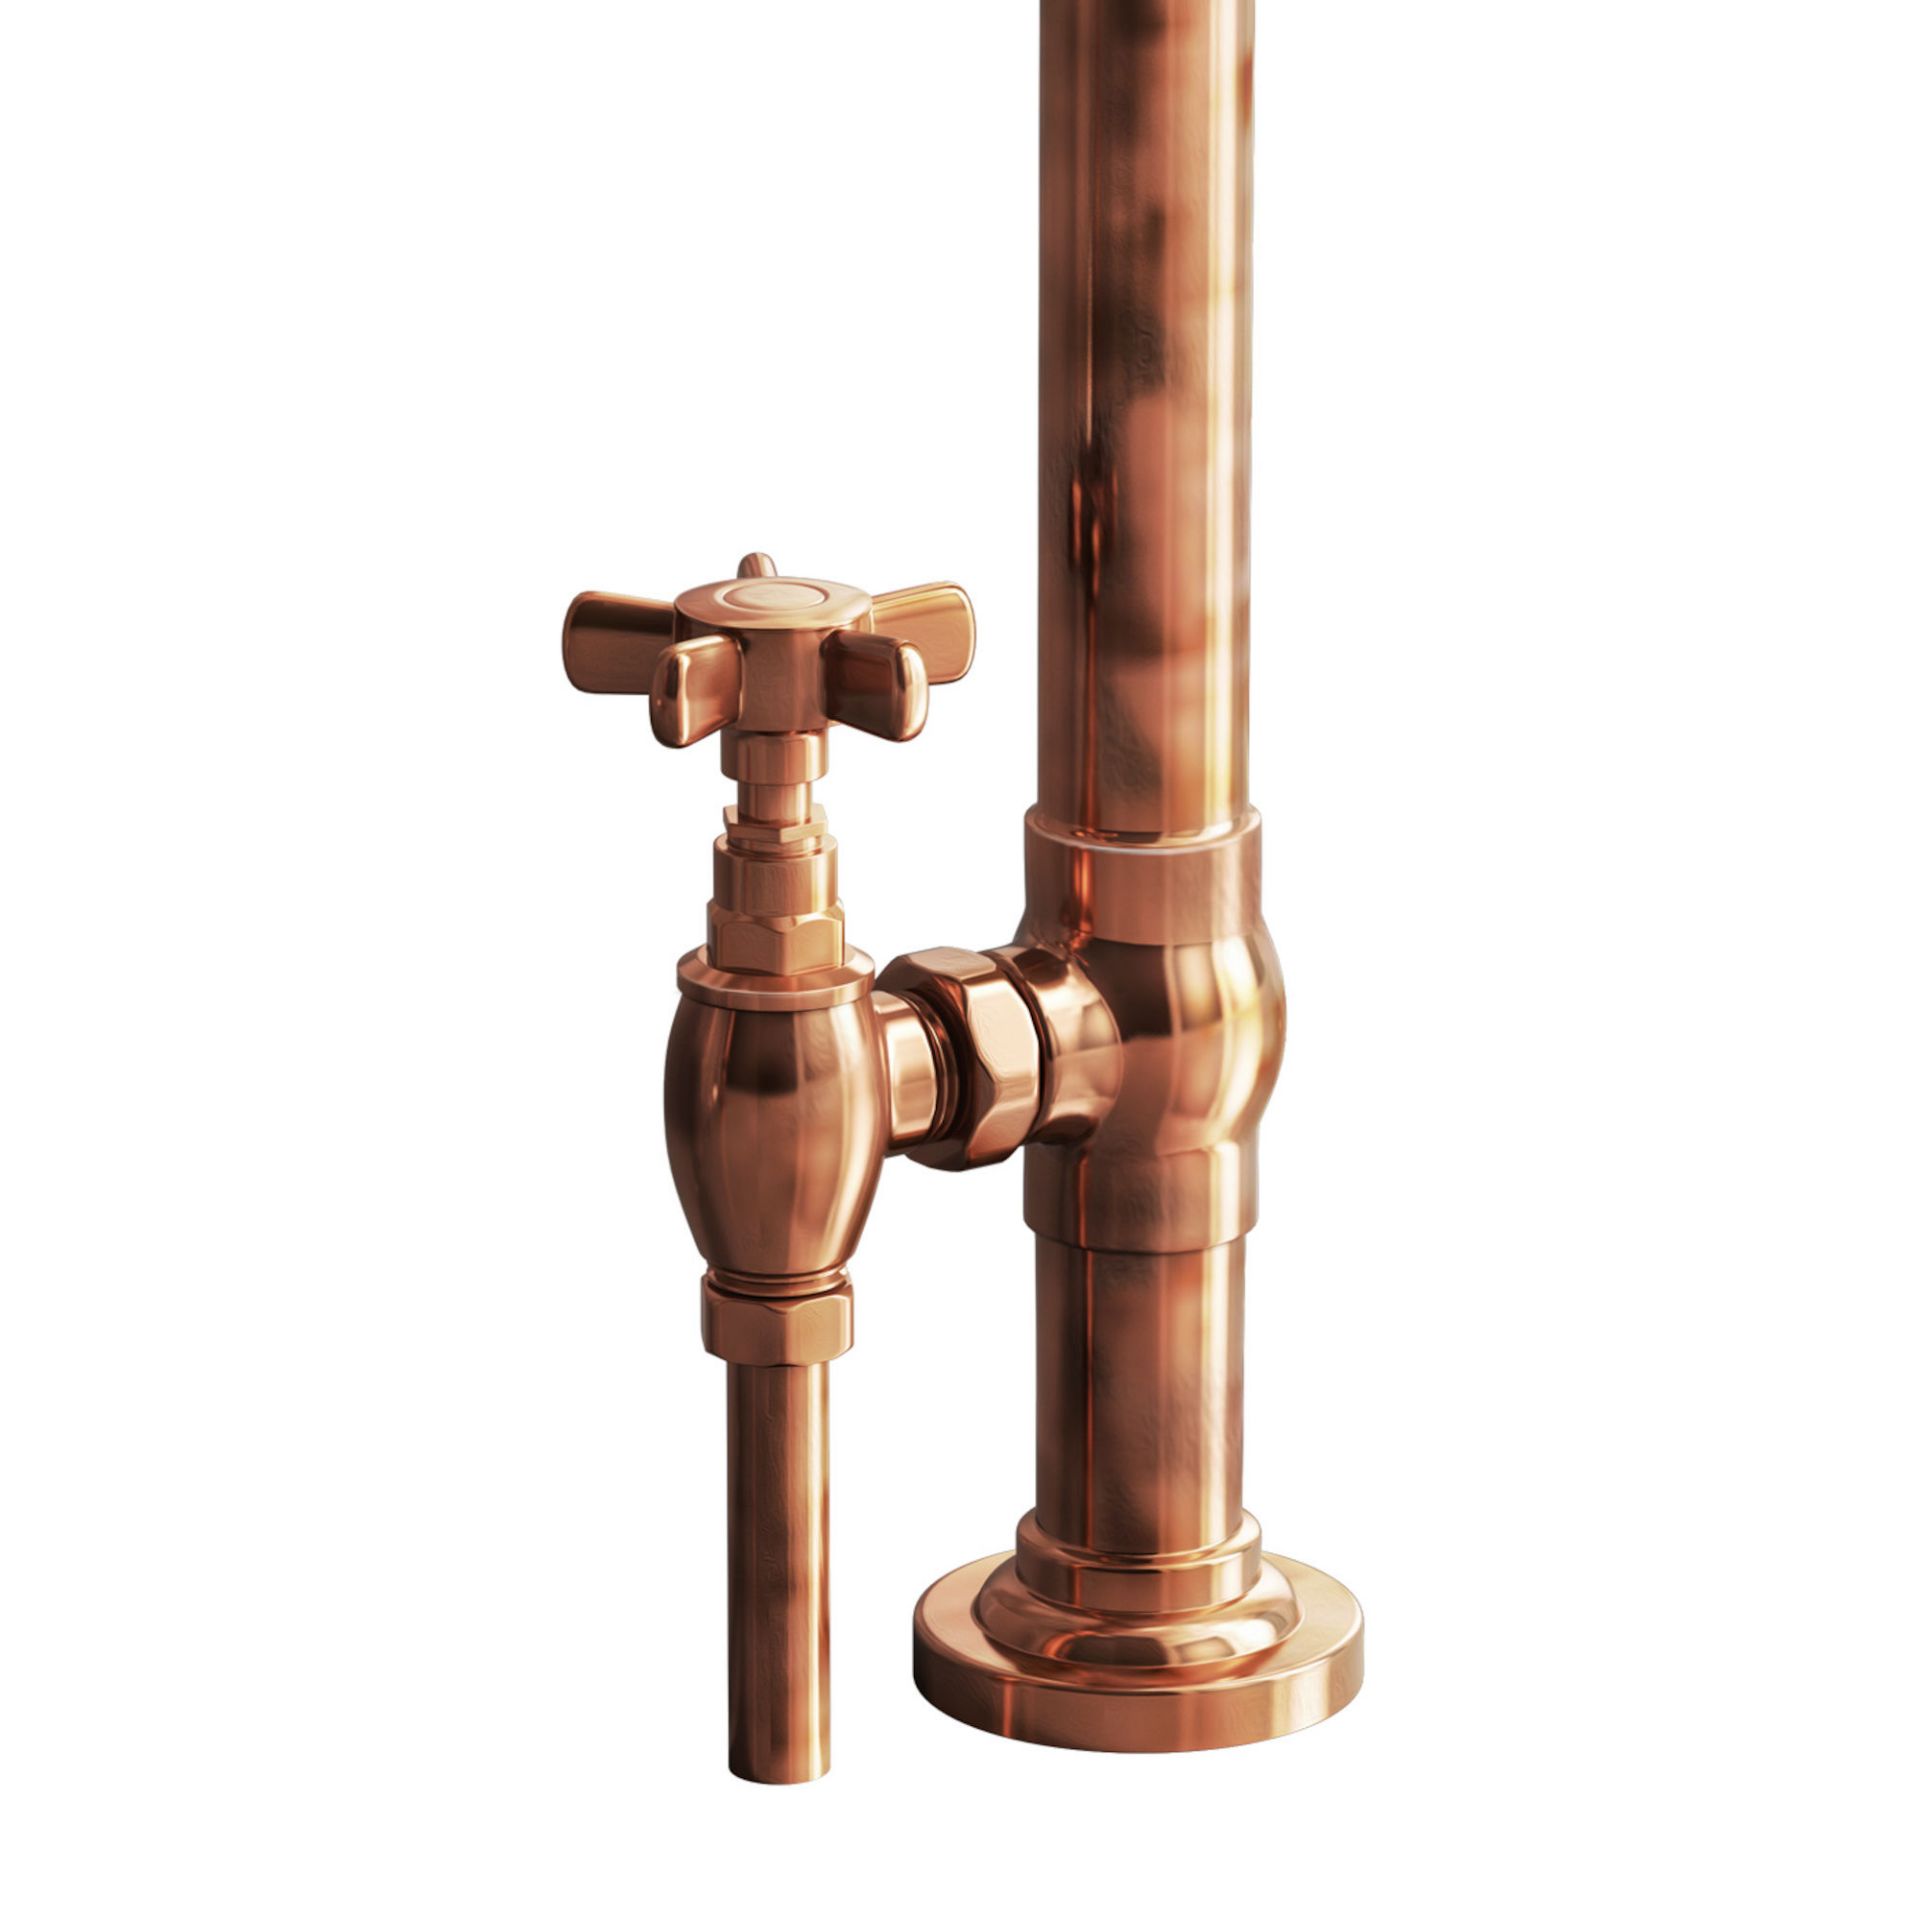 (PT251) Copper Radiator Valves Introducing The Hotel Collection - Modern Glamour Beautiful copper